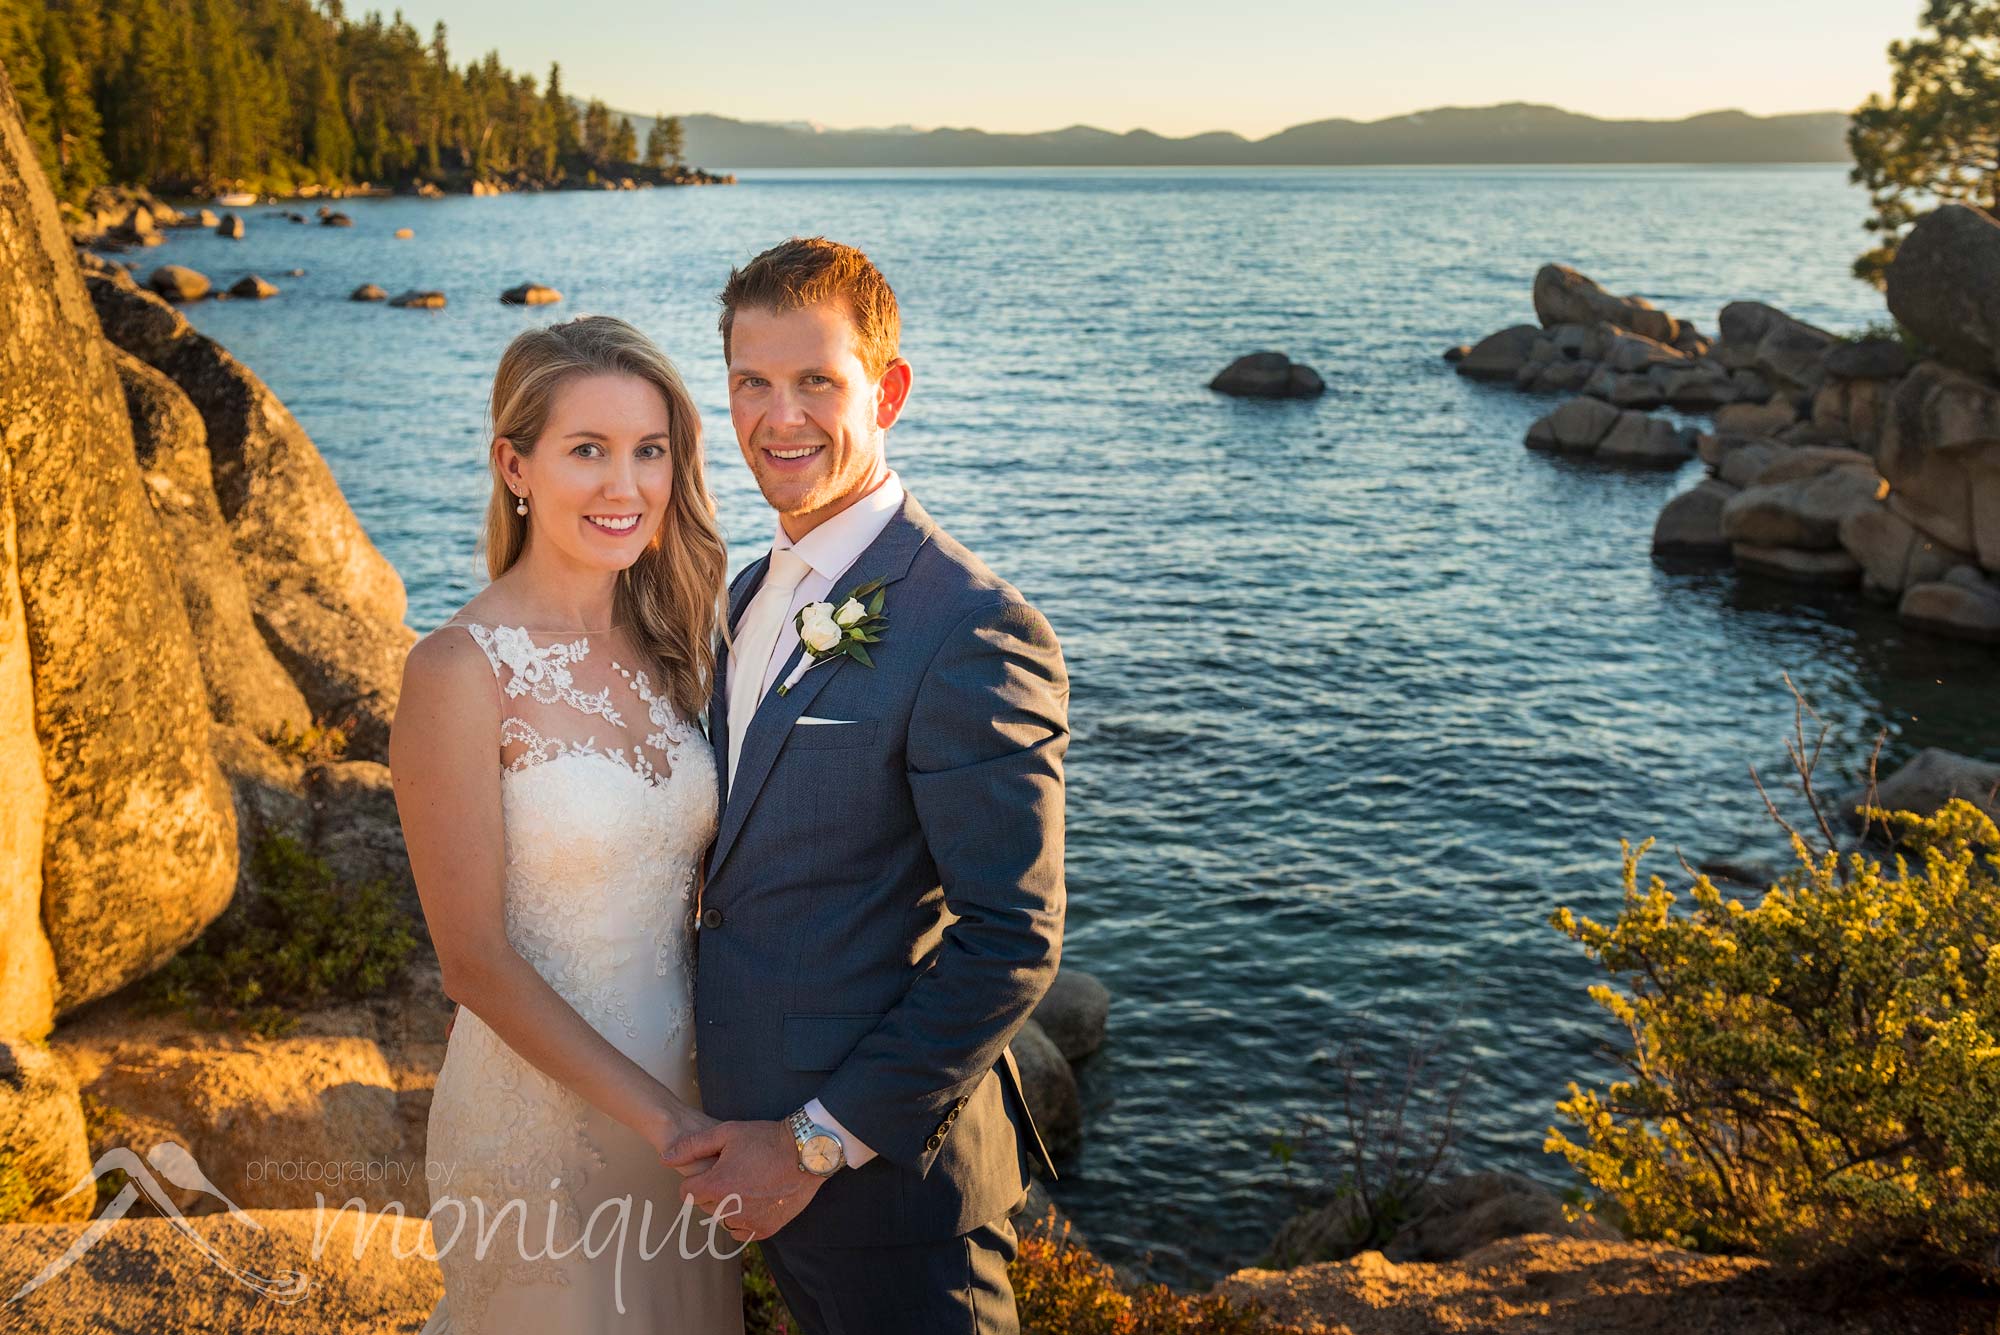 Lake Tahoe Covid-19 elopement photography featuring the bride and groom at a beach with boulders by Photography by Monique adventure photographers 